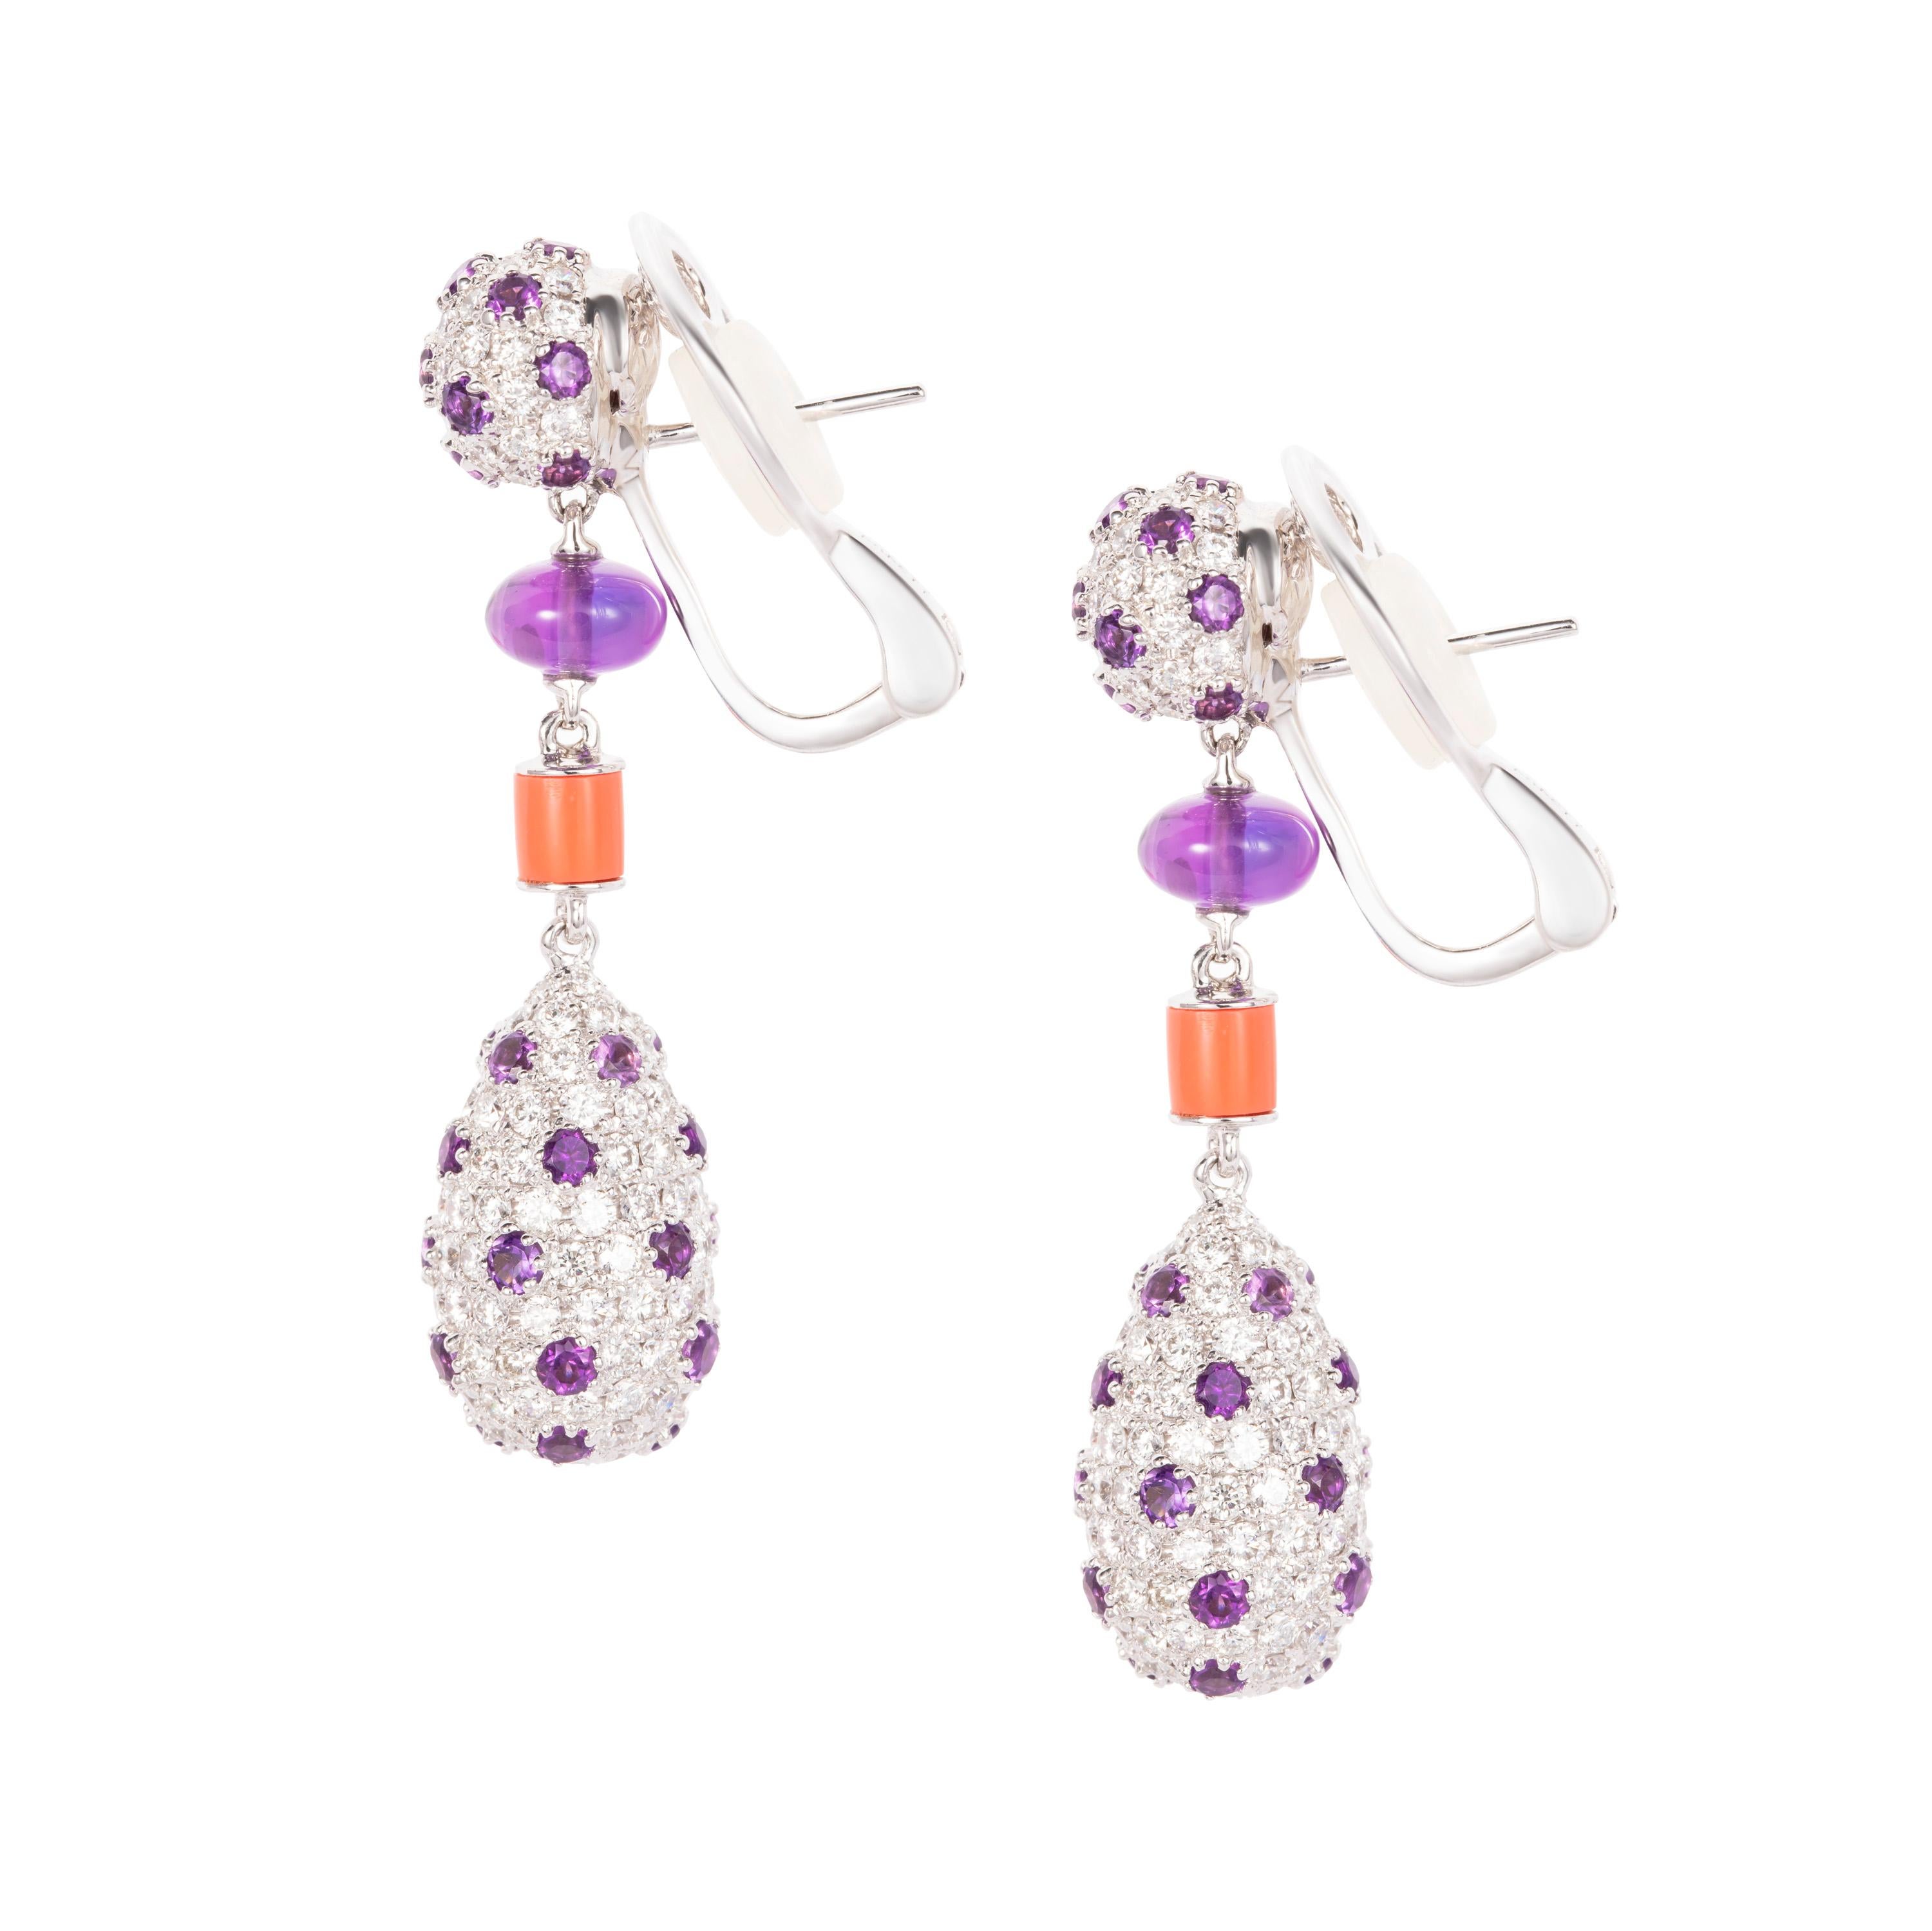 Butani's one-of-a-kind drop earrings are made from 18K white gold that is pavé encrusted with 5.20 white diamonds and 3.07 carats of purple amethyst.  Two amethyst beads (totaling 3.05 carats) and two coral beads (totaling 0.89 carats) sit at the